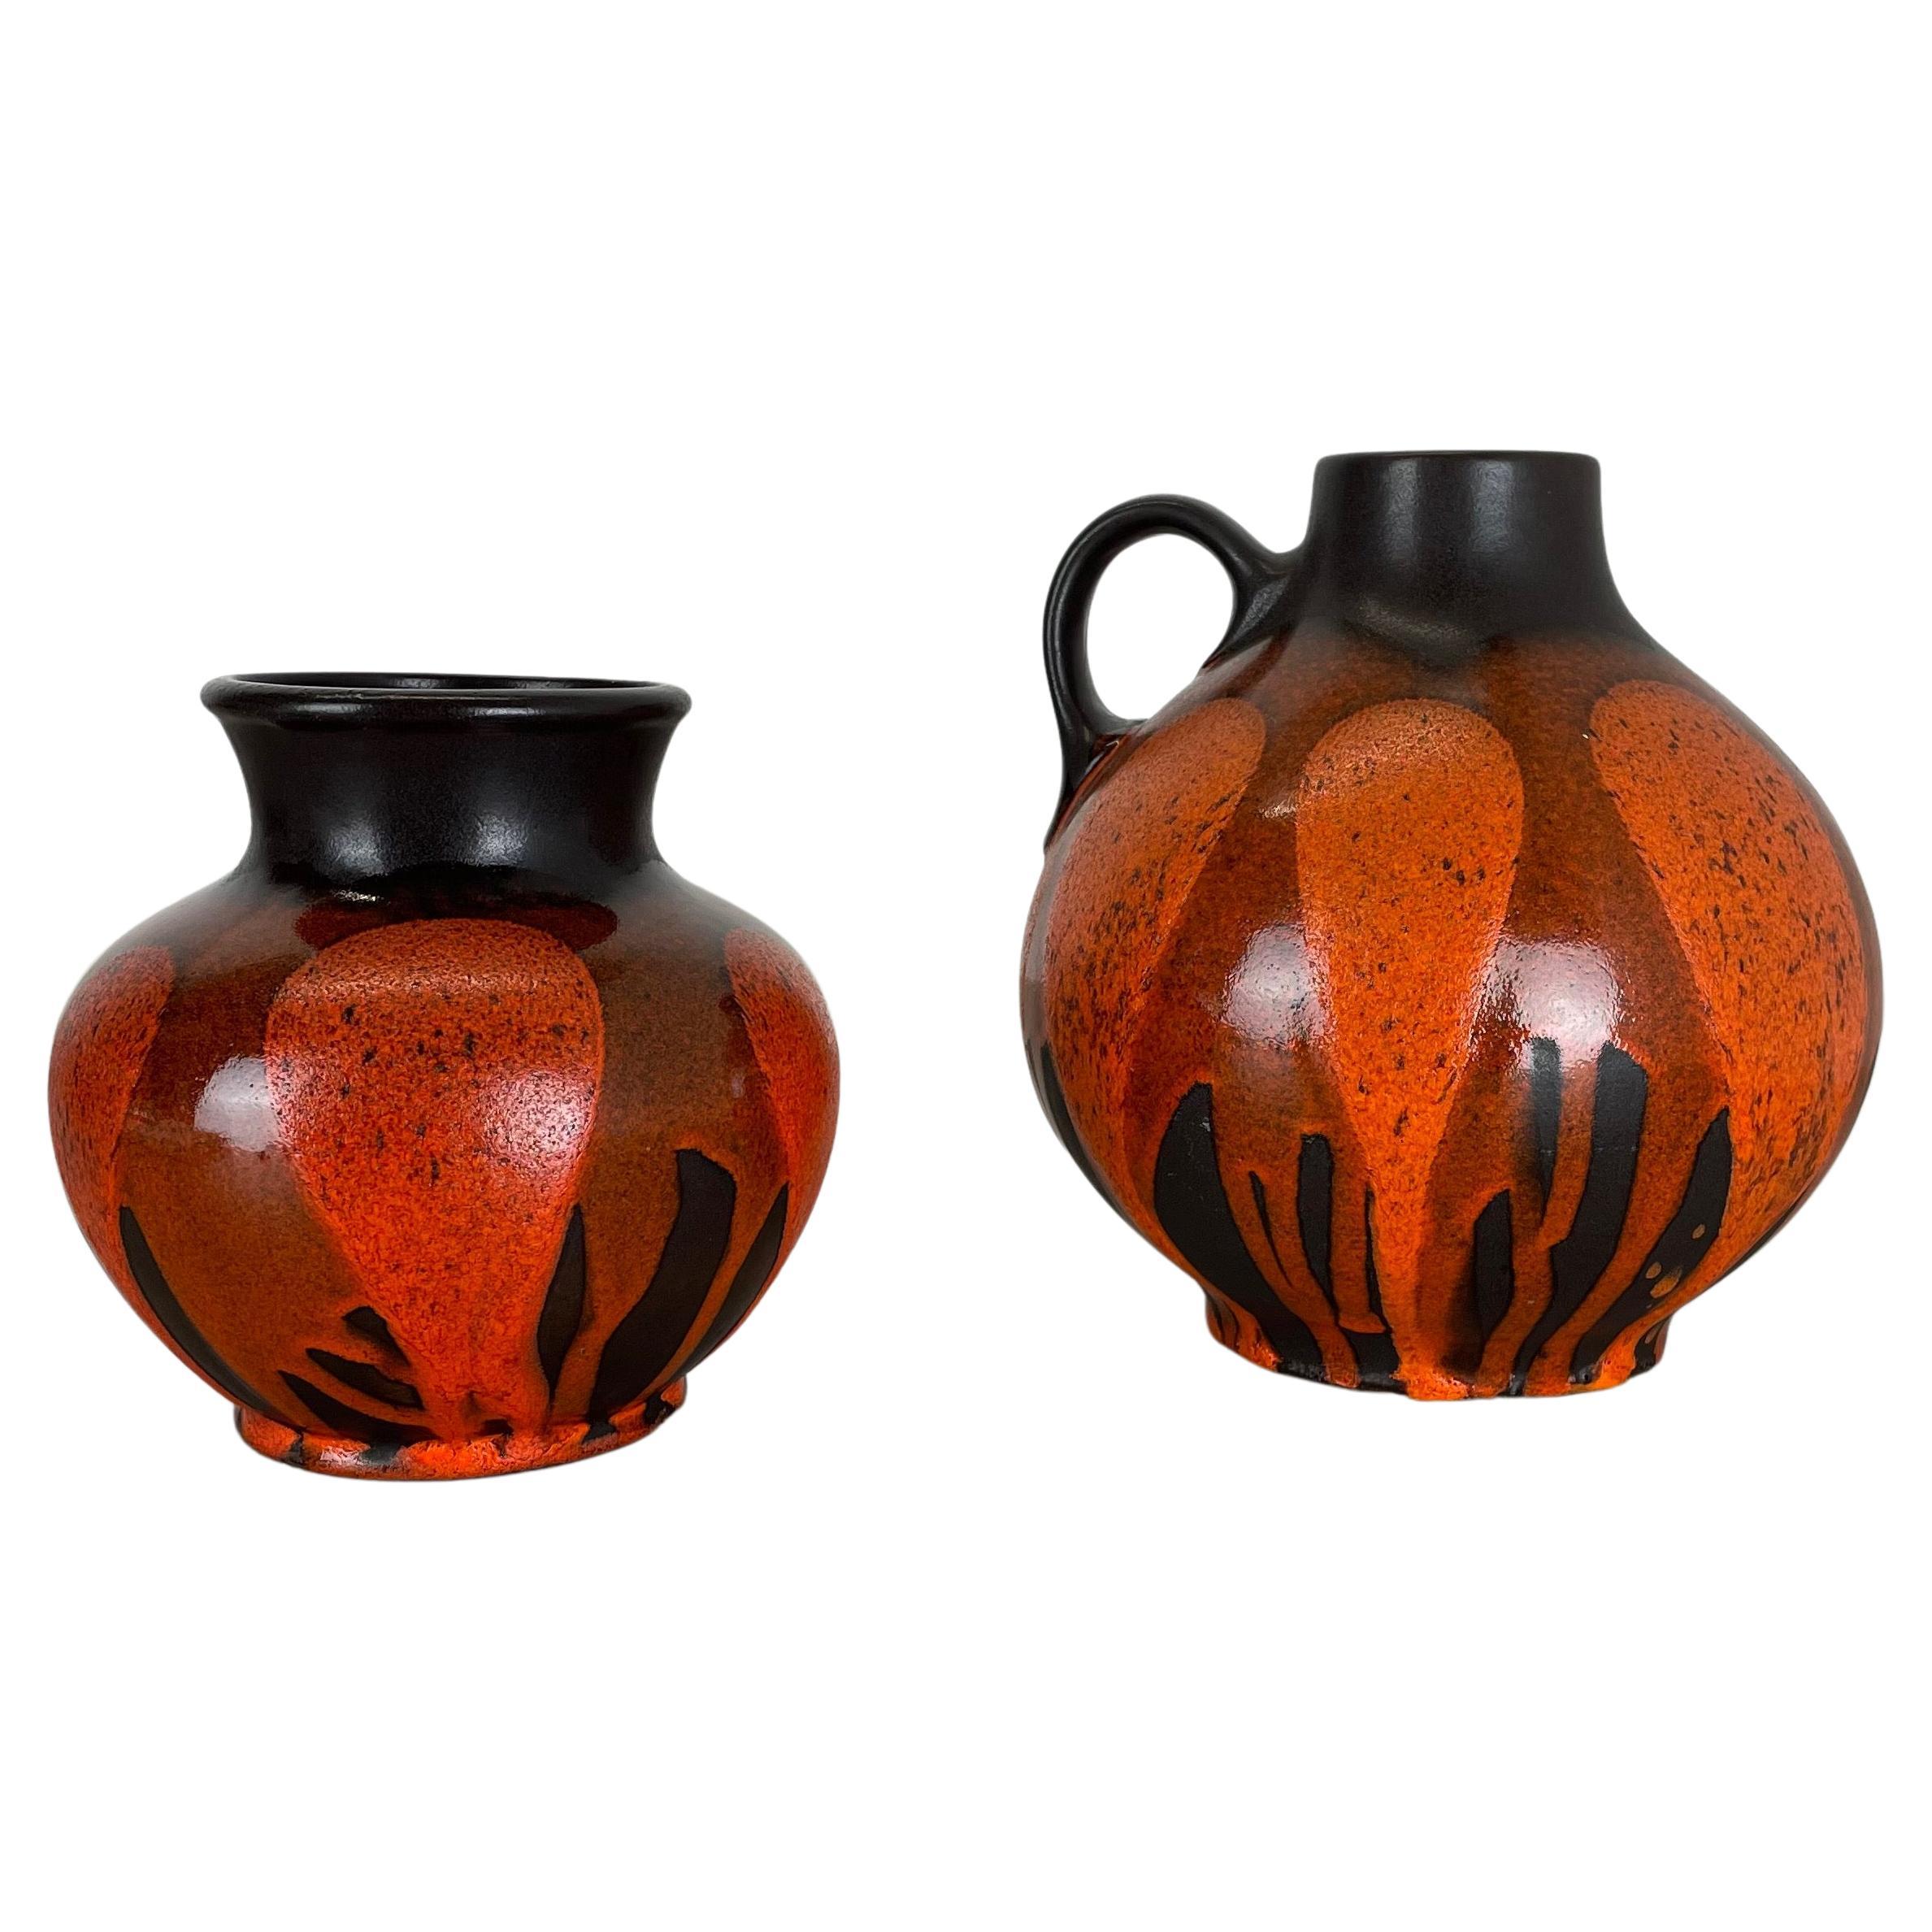 Set of Two Pottery Vases "Red Black" Objects by Steuler Ceramics Germany, 1970s For Sale